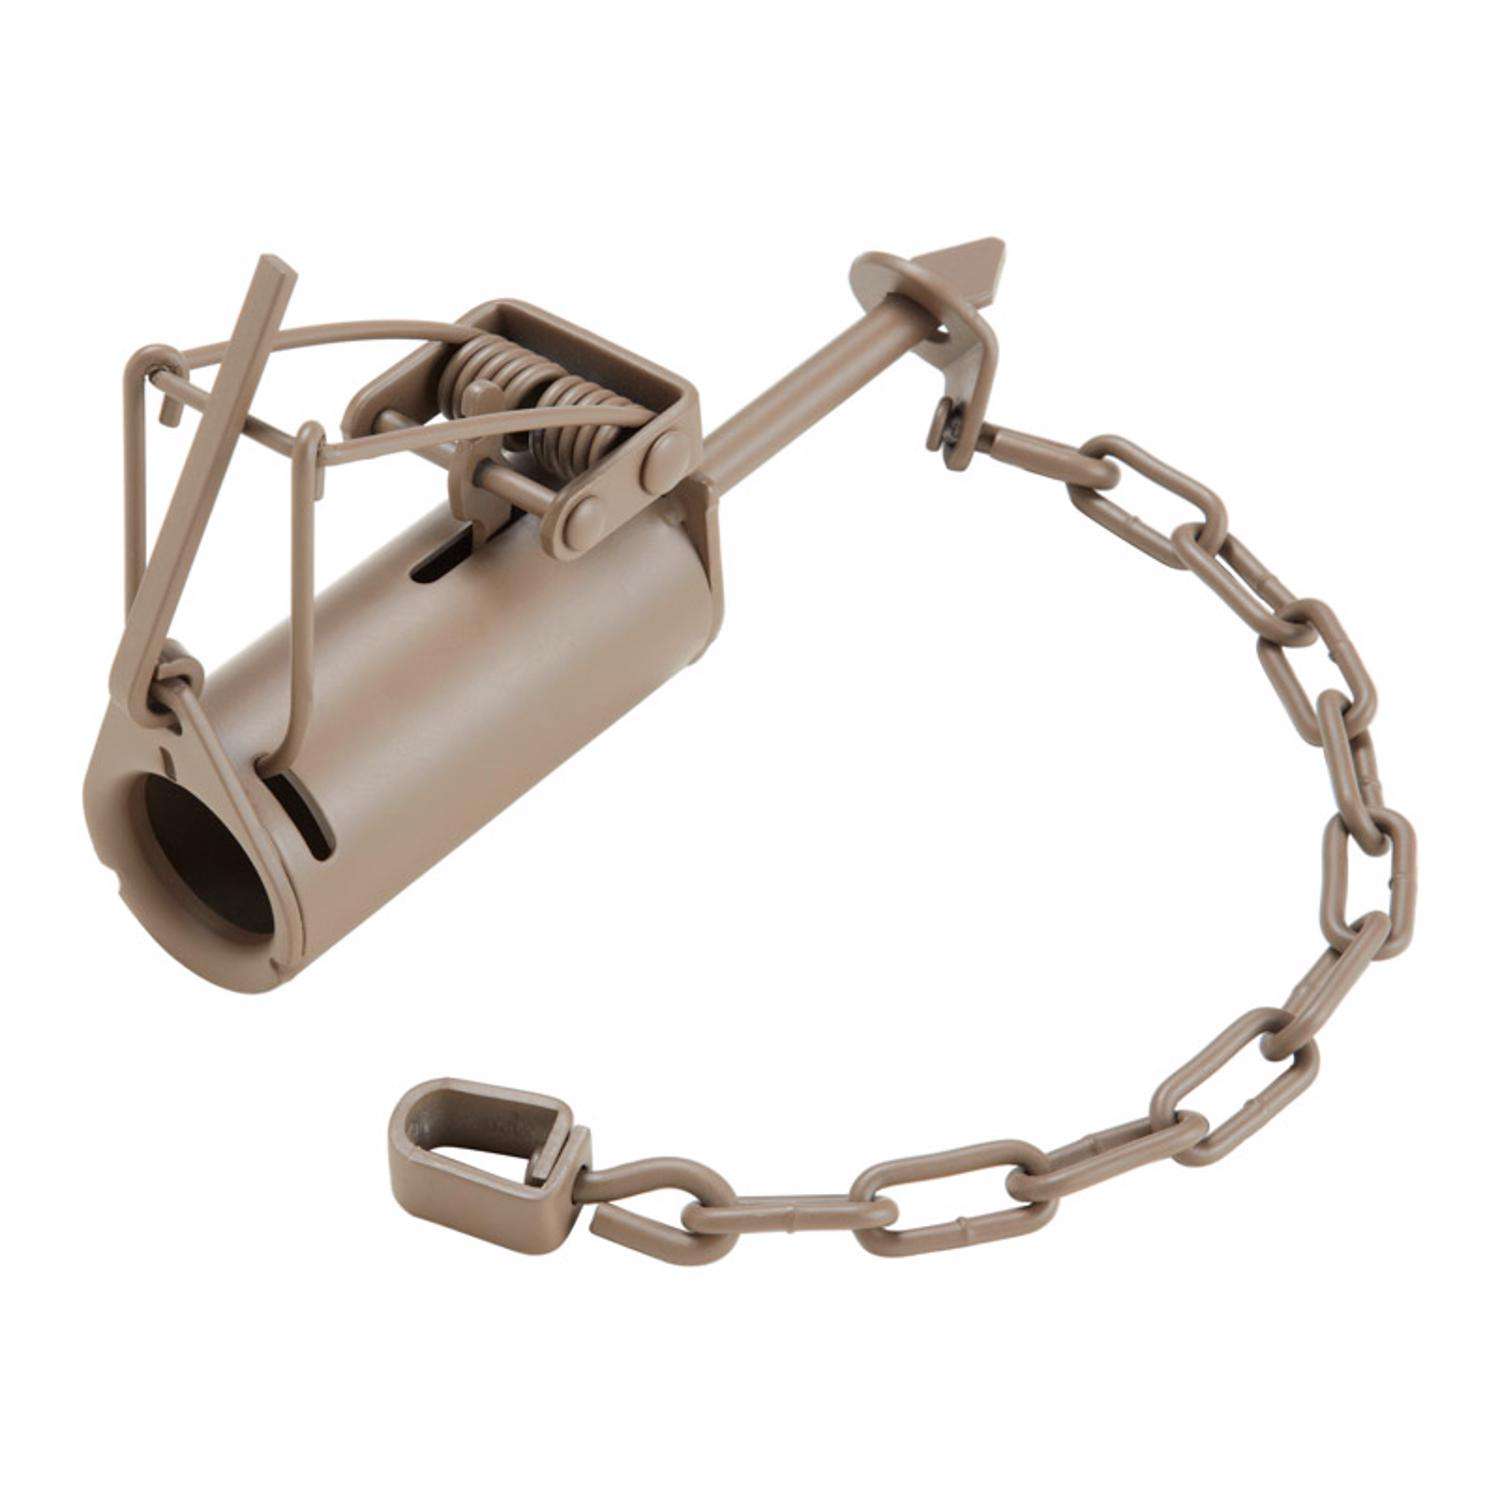 Duke Dog Proof Small Foot-Hold Animal Trap For Raccoons 1 pk - Ace Hardware